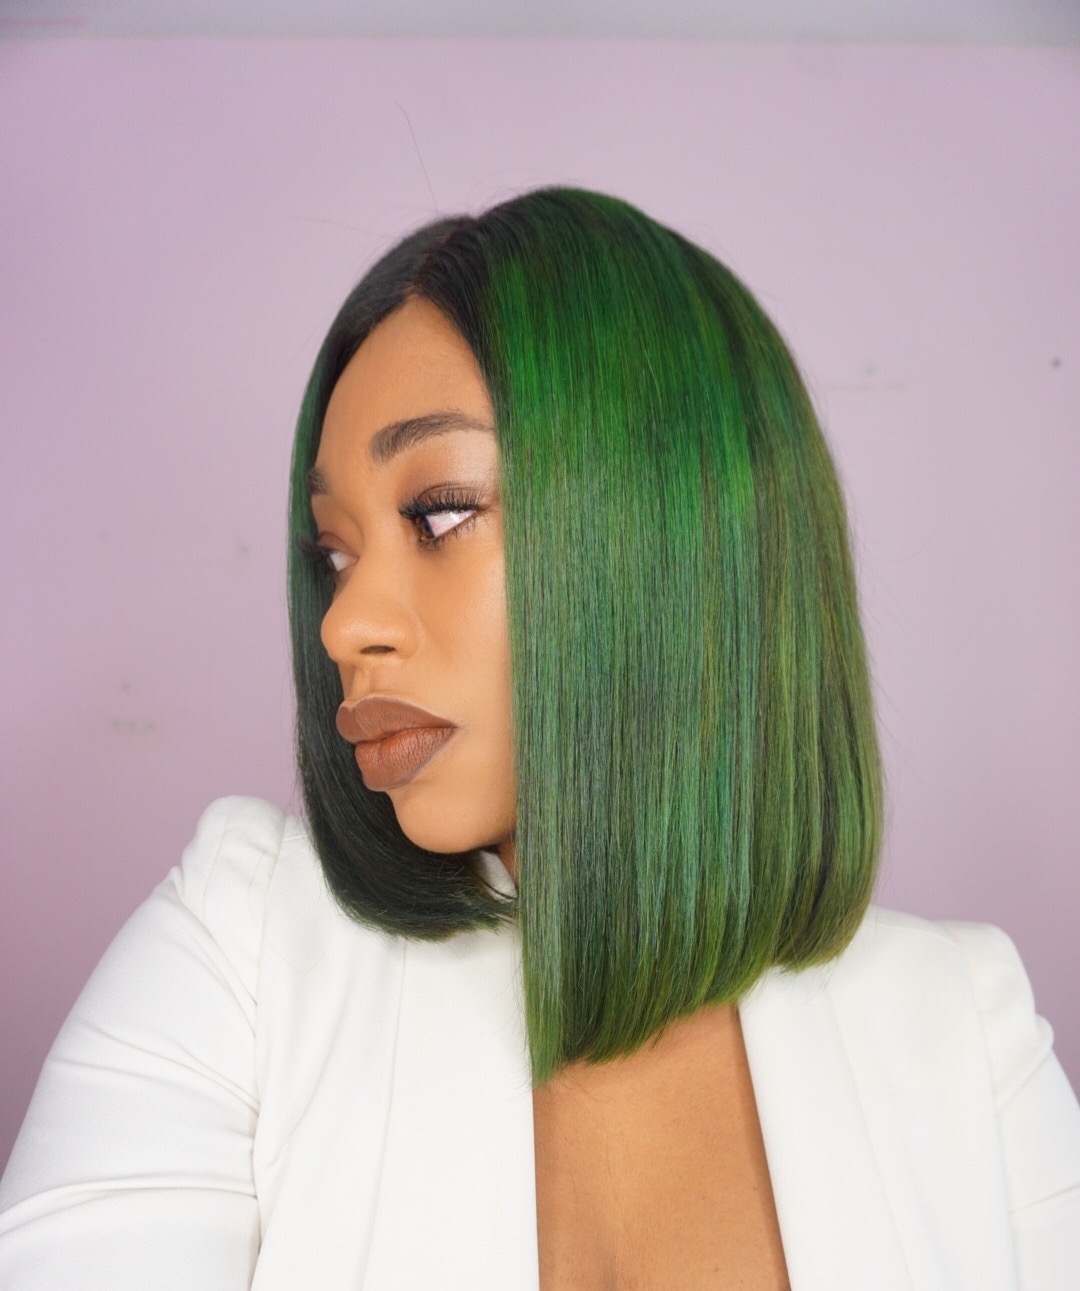 Kylie Jenner Inspired Green Hair Tutorial Chimere Nicole